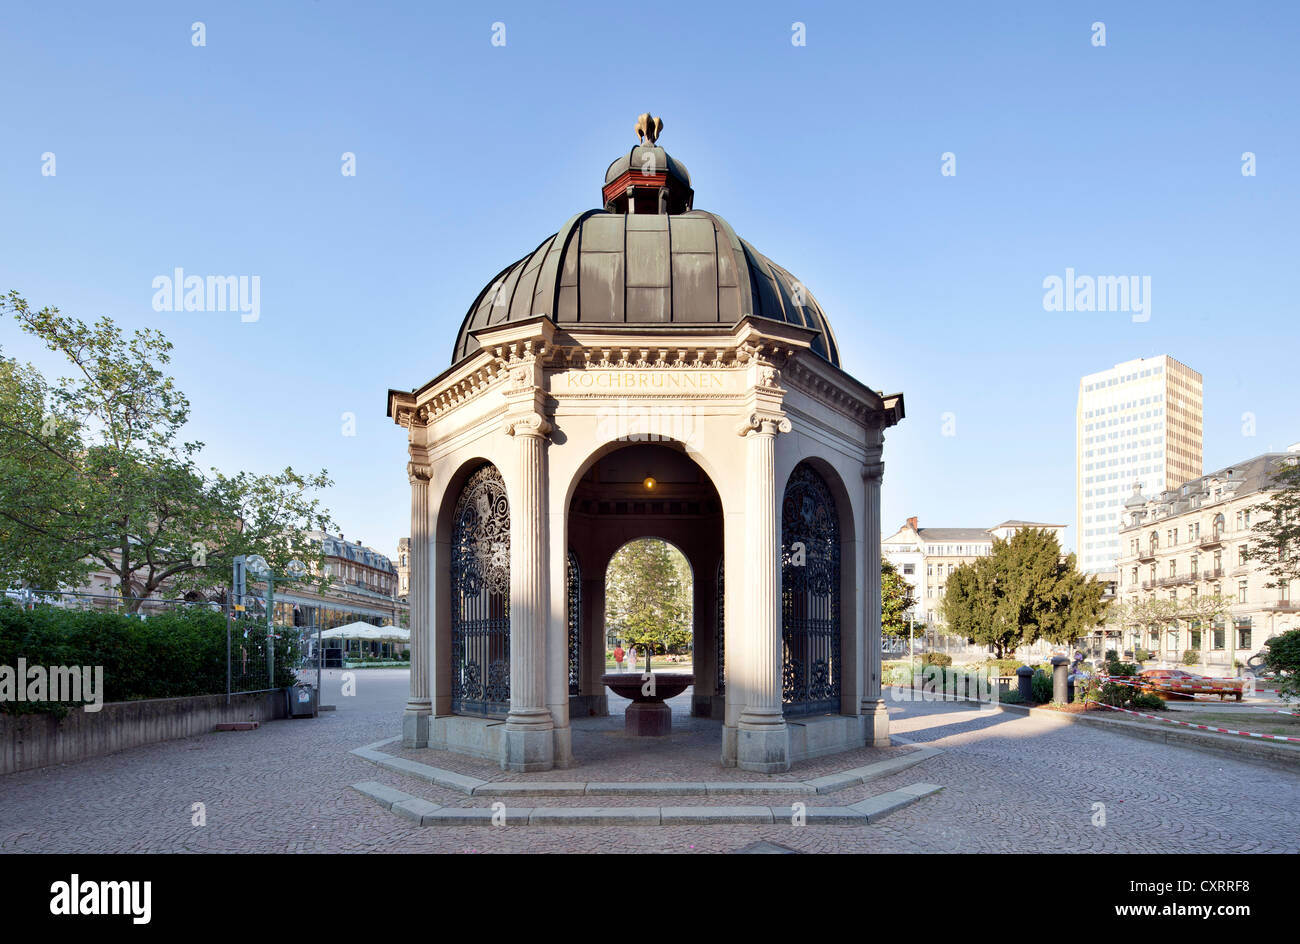 Kochbrunnentempel, fontaine, des sources thermales, chlorure de sodium Hot spring, Wiesbaden, Hesse, Germany, Europe Banque D'Images